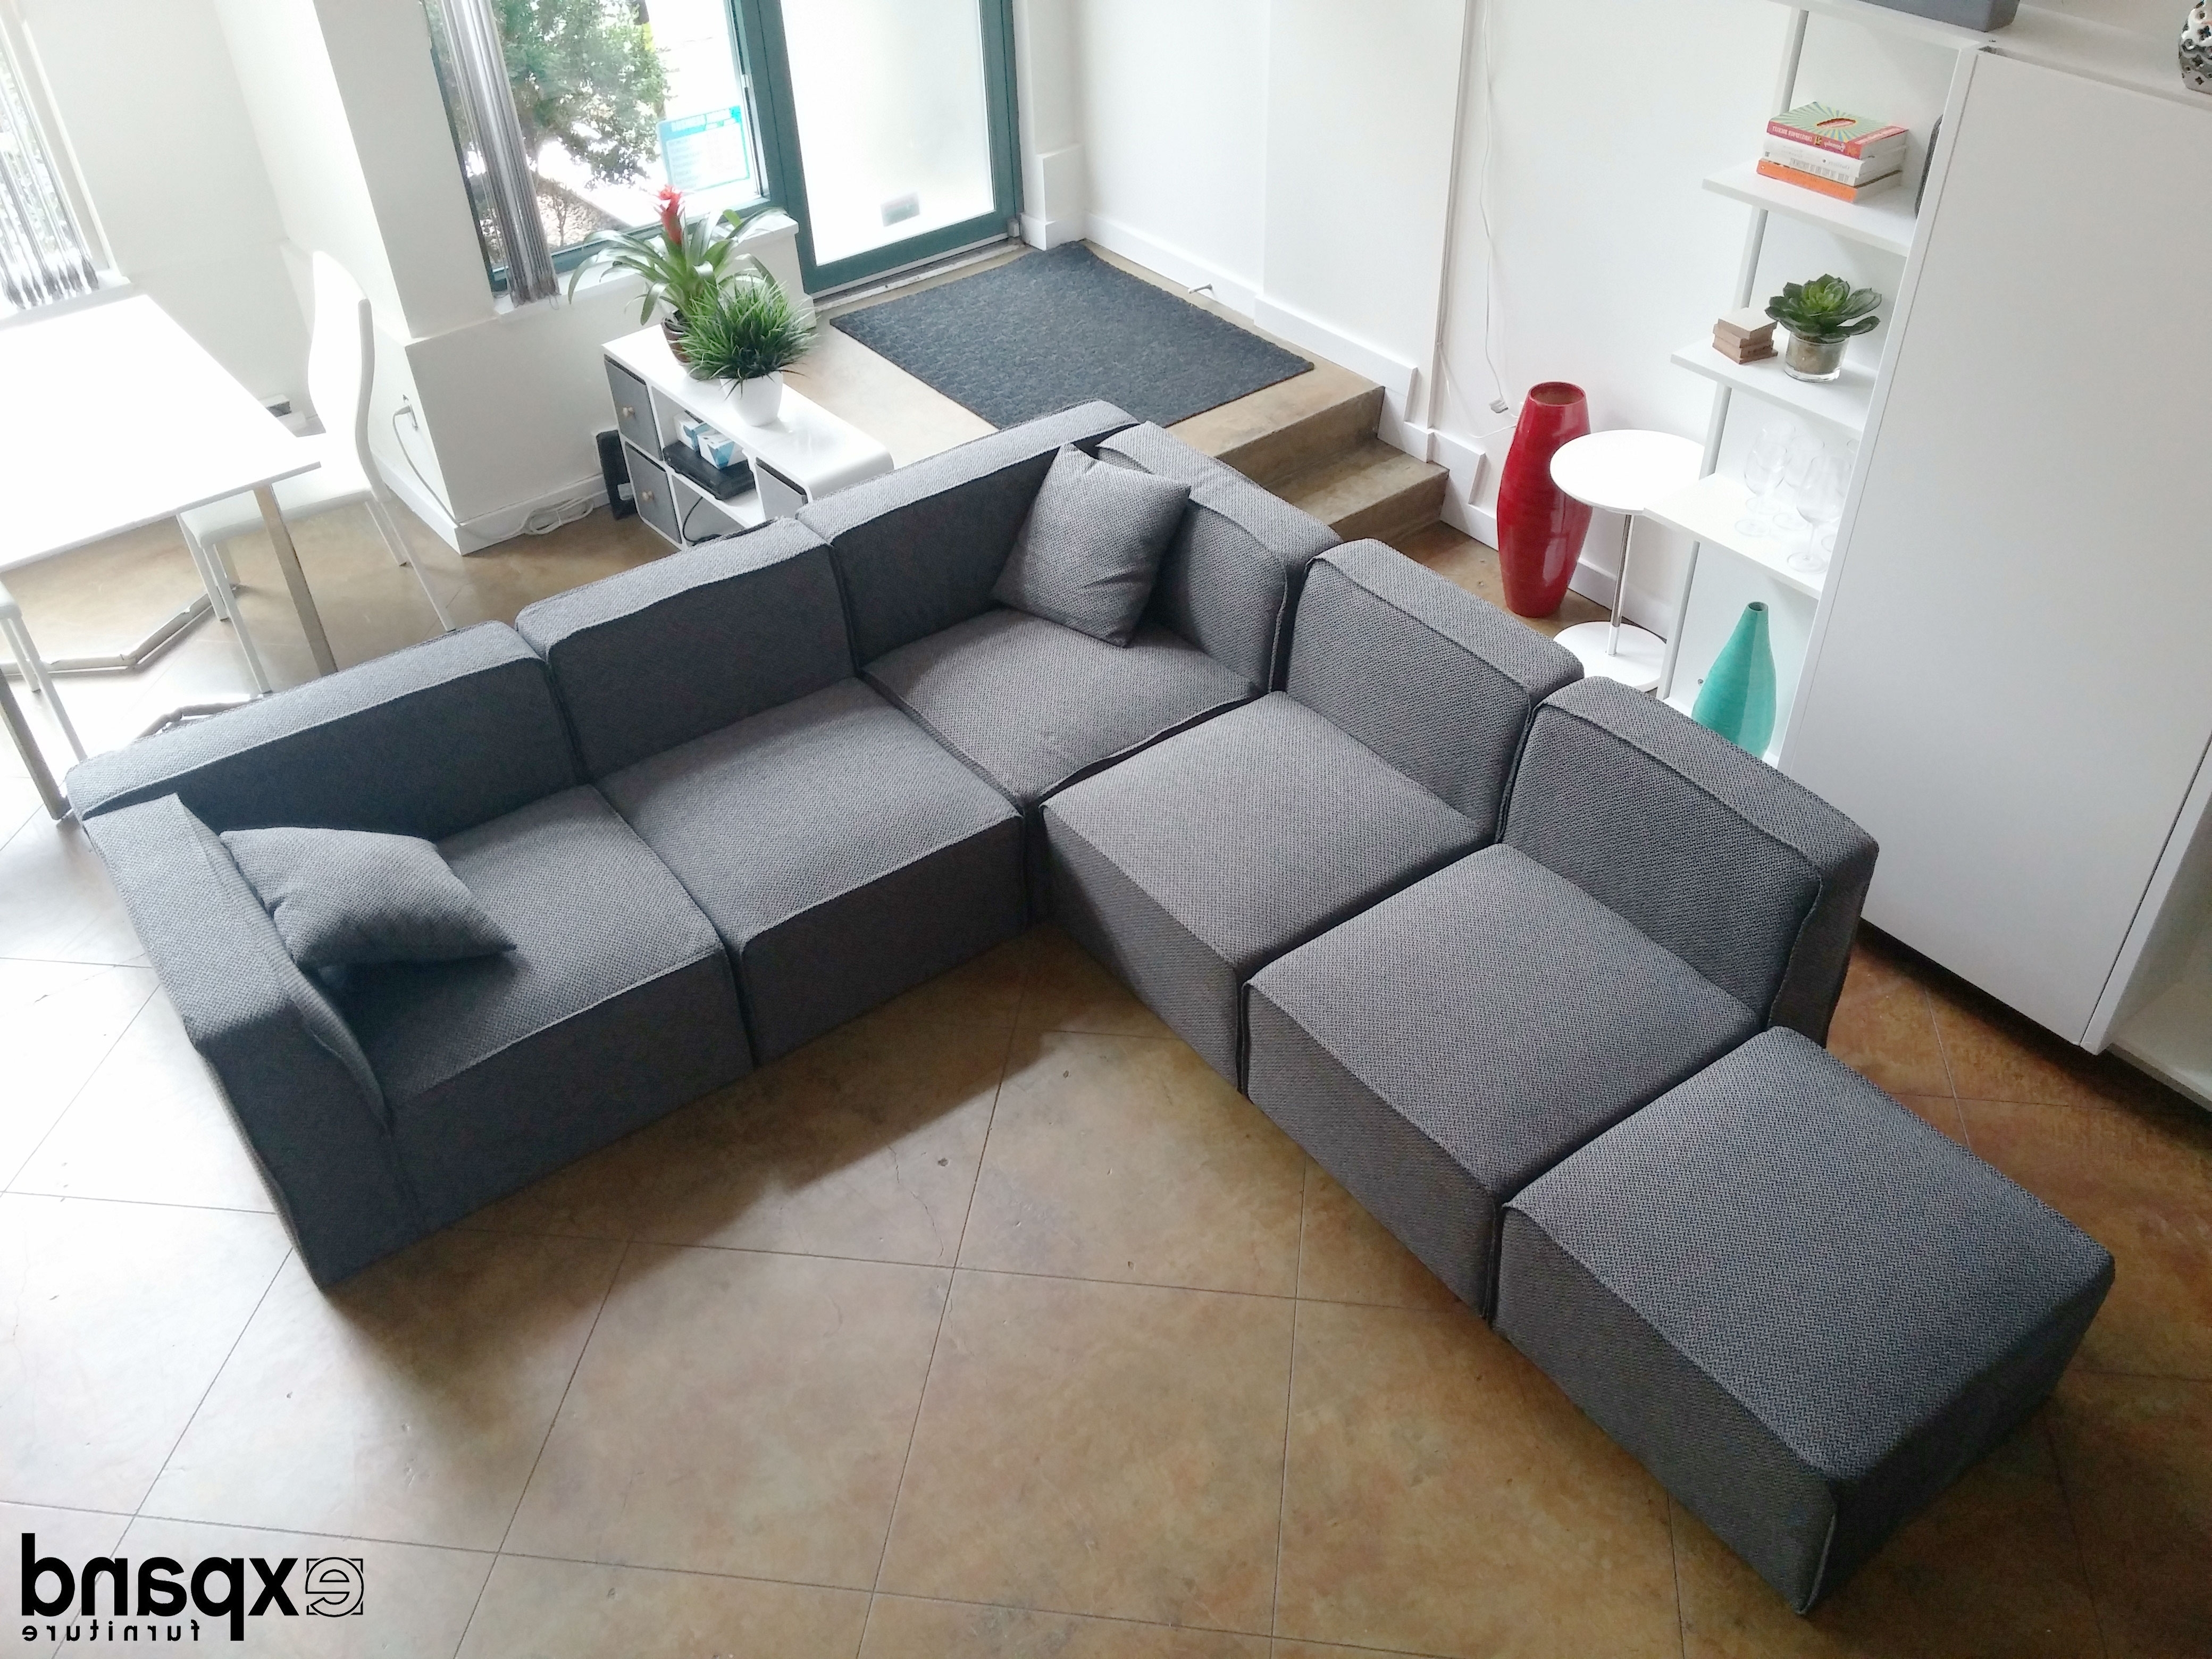 Small modular sofa sectionals : type of
sofa for a stylish look